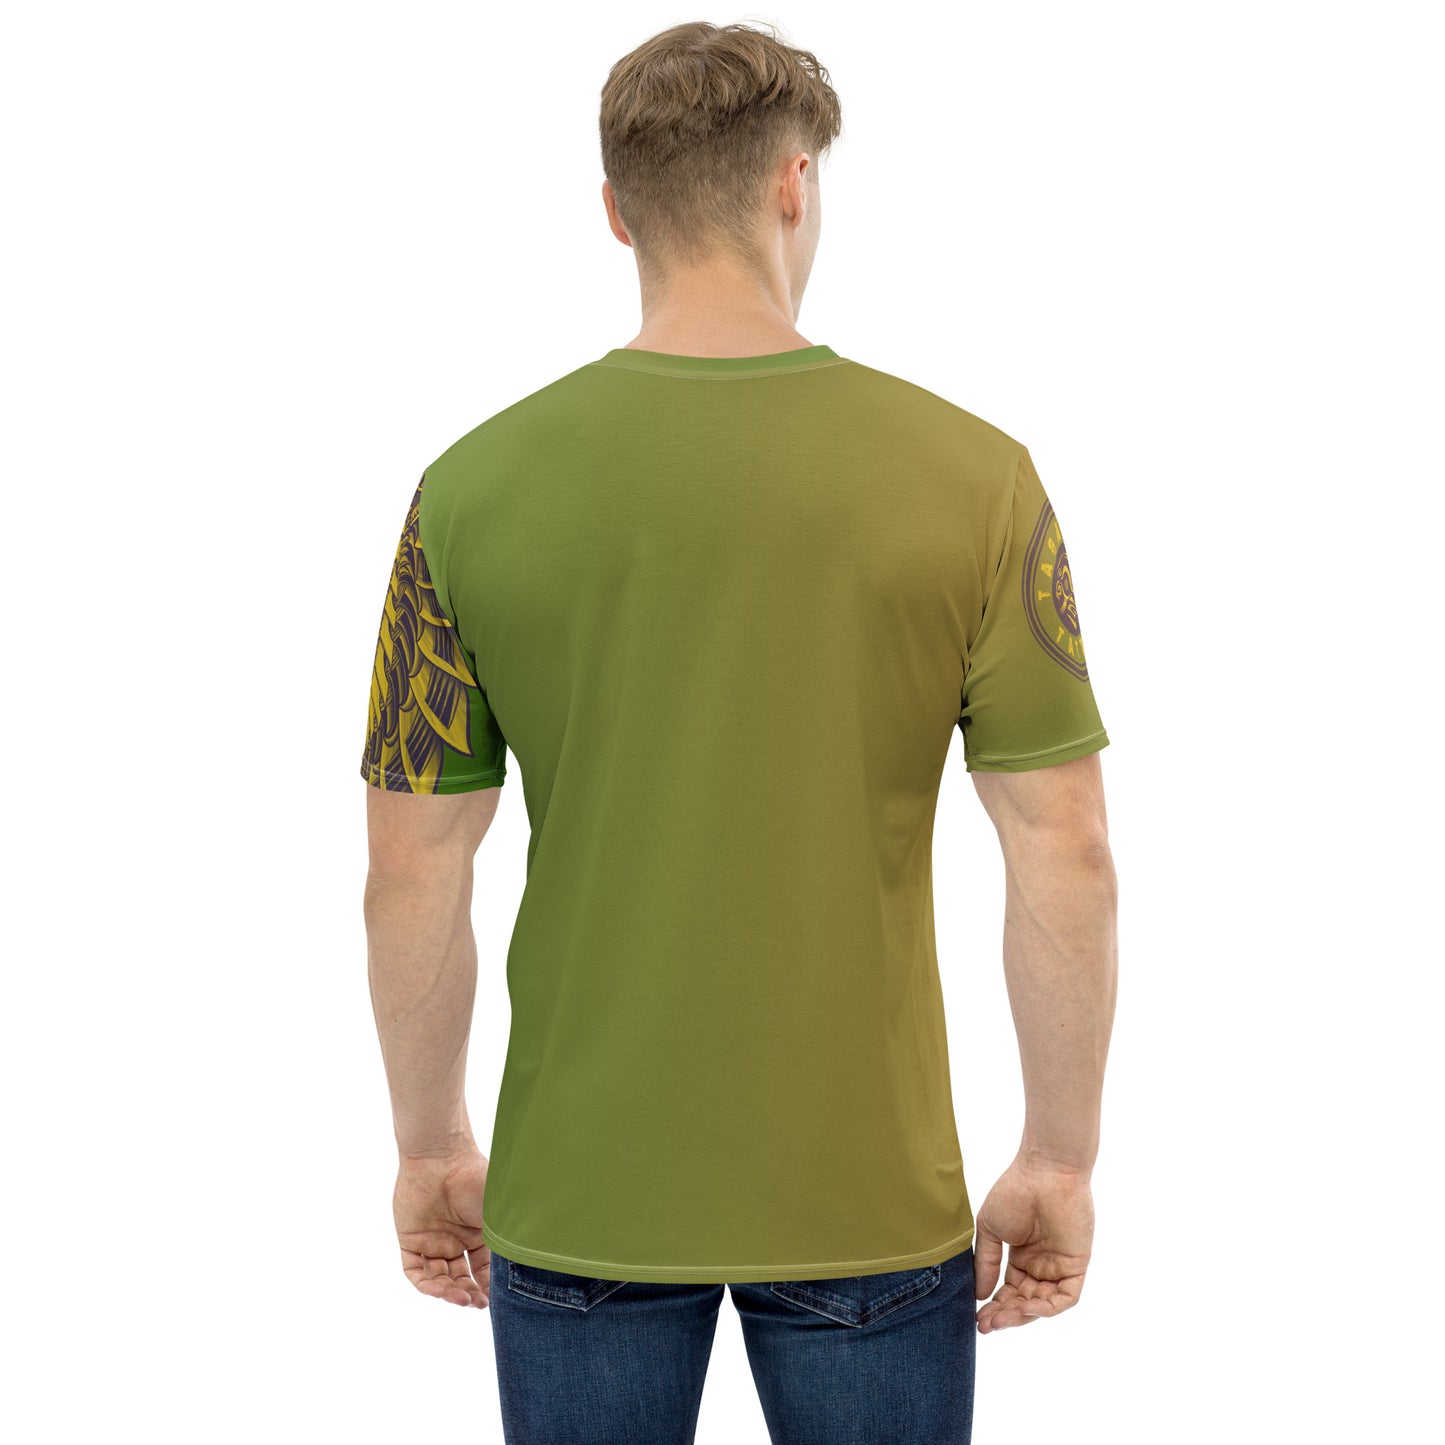 Pacific-Style Tiger Tattoo Tee - Green Gradient